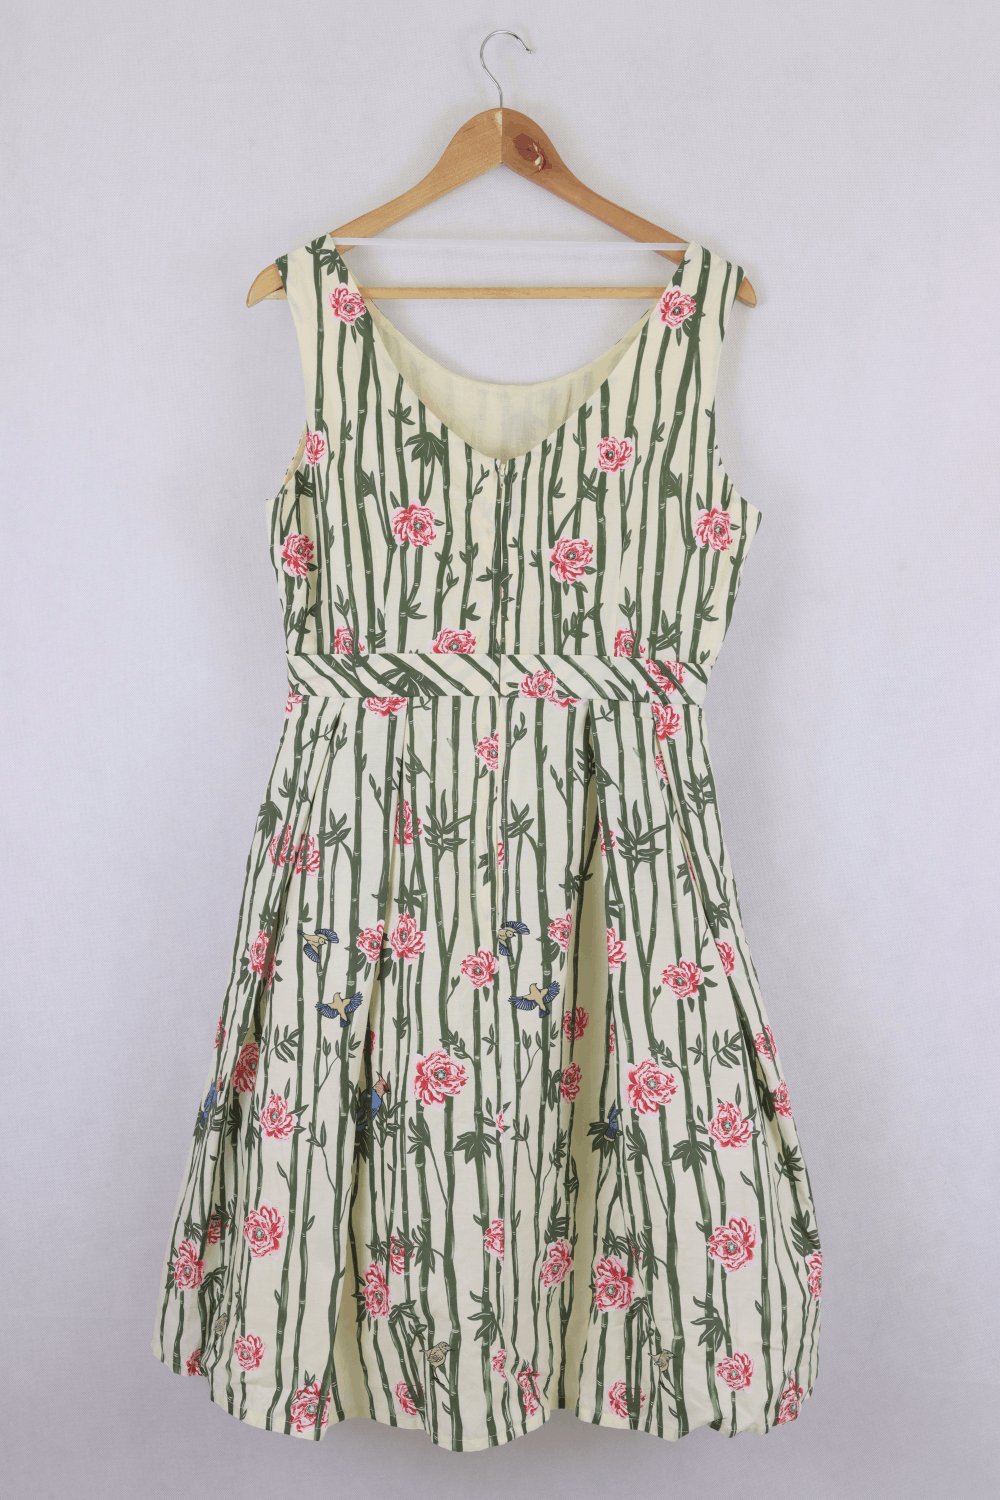 Revival Floral  Yellow And Green Dress 12 BNWT